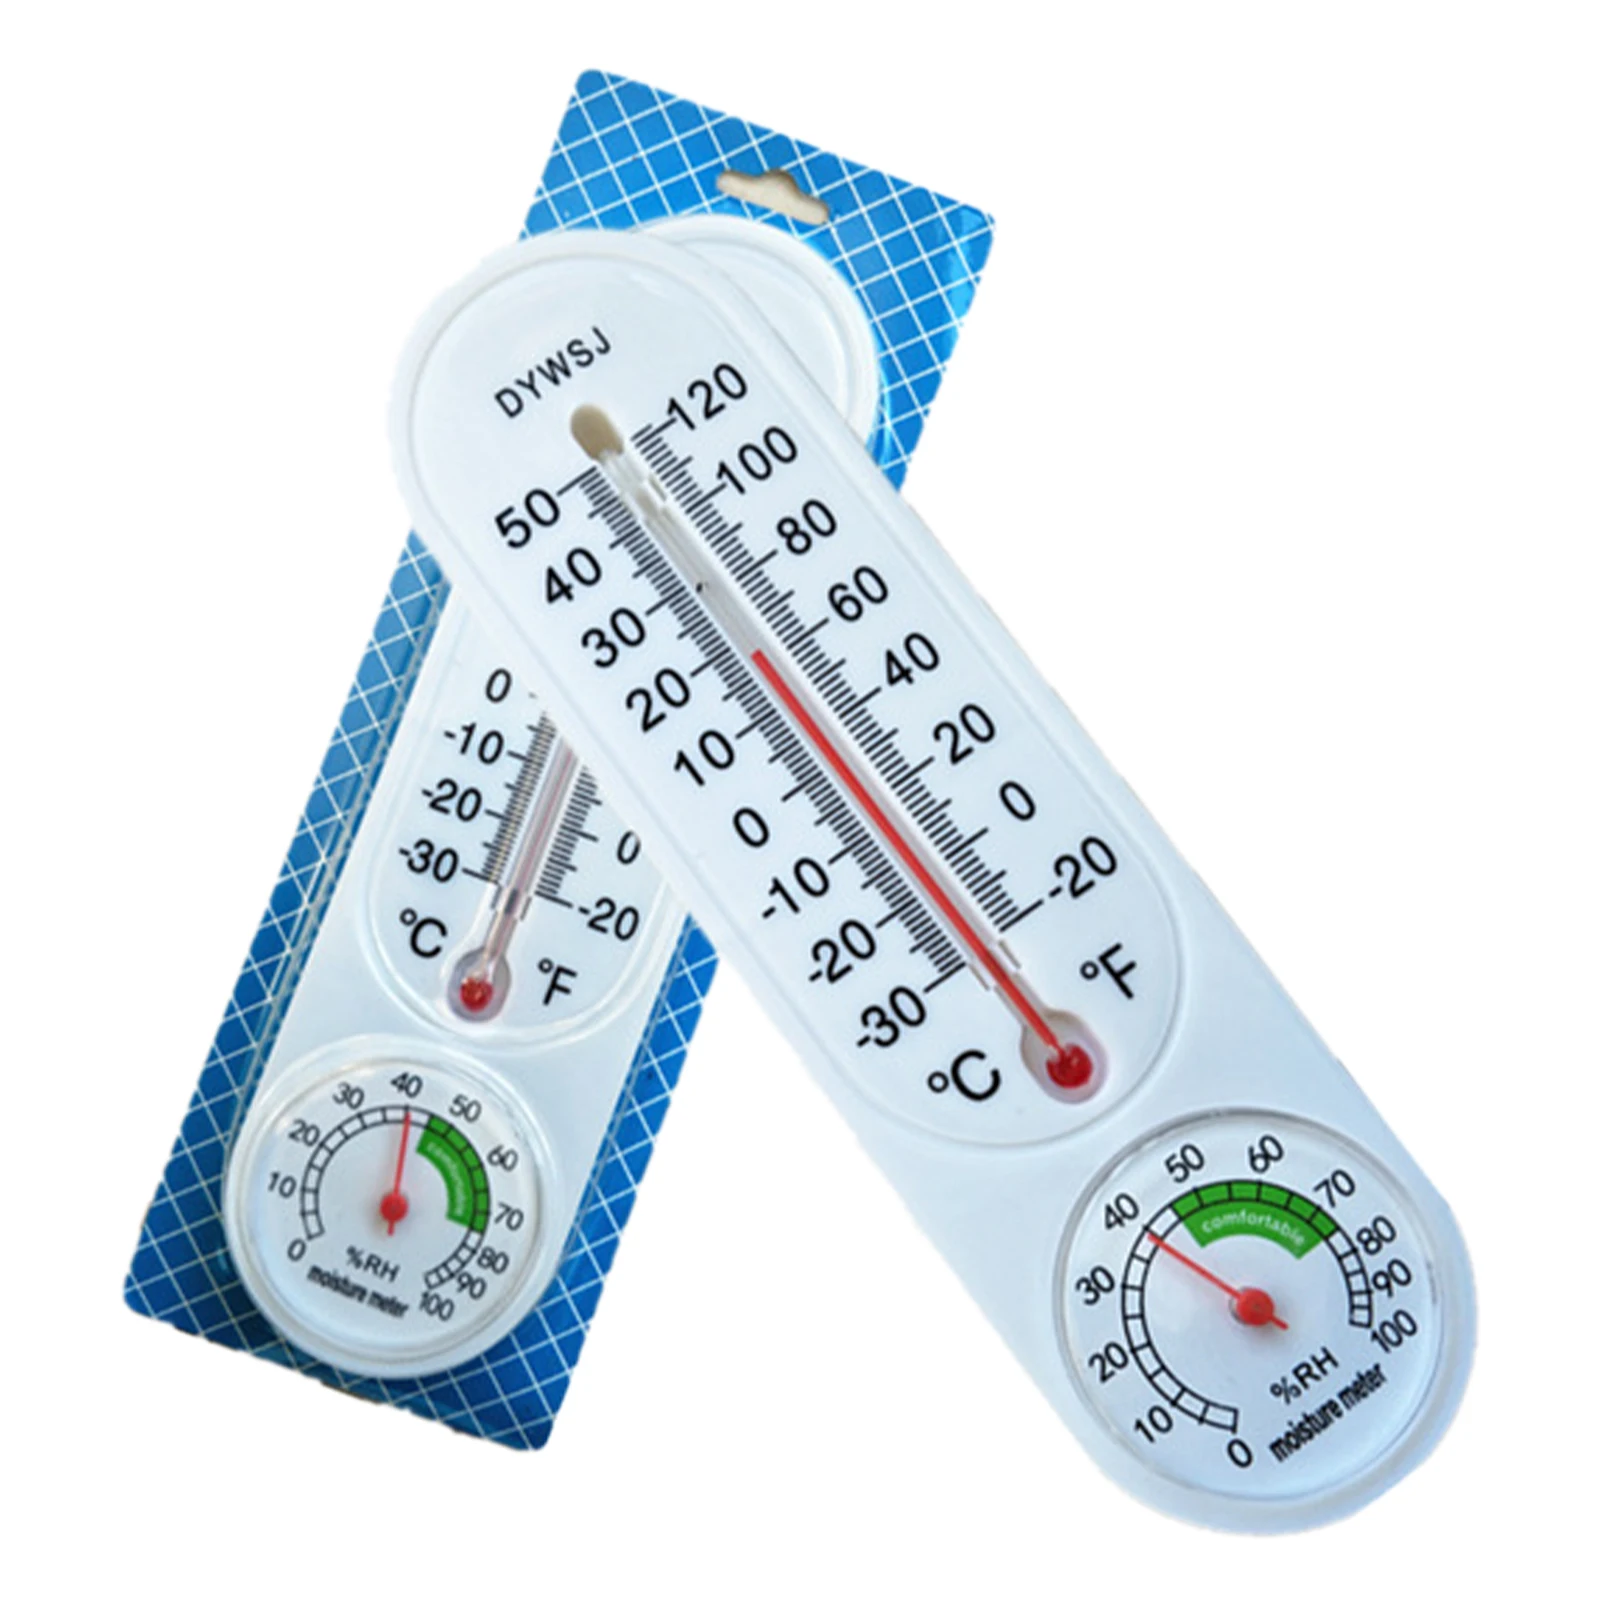 

Wall-mounted Digital Thermometer Humidity Meter Gauge Indoor Greenhouse Temperature Sensor Hygrometer Weather Station For Home